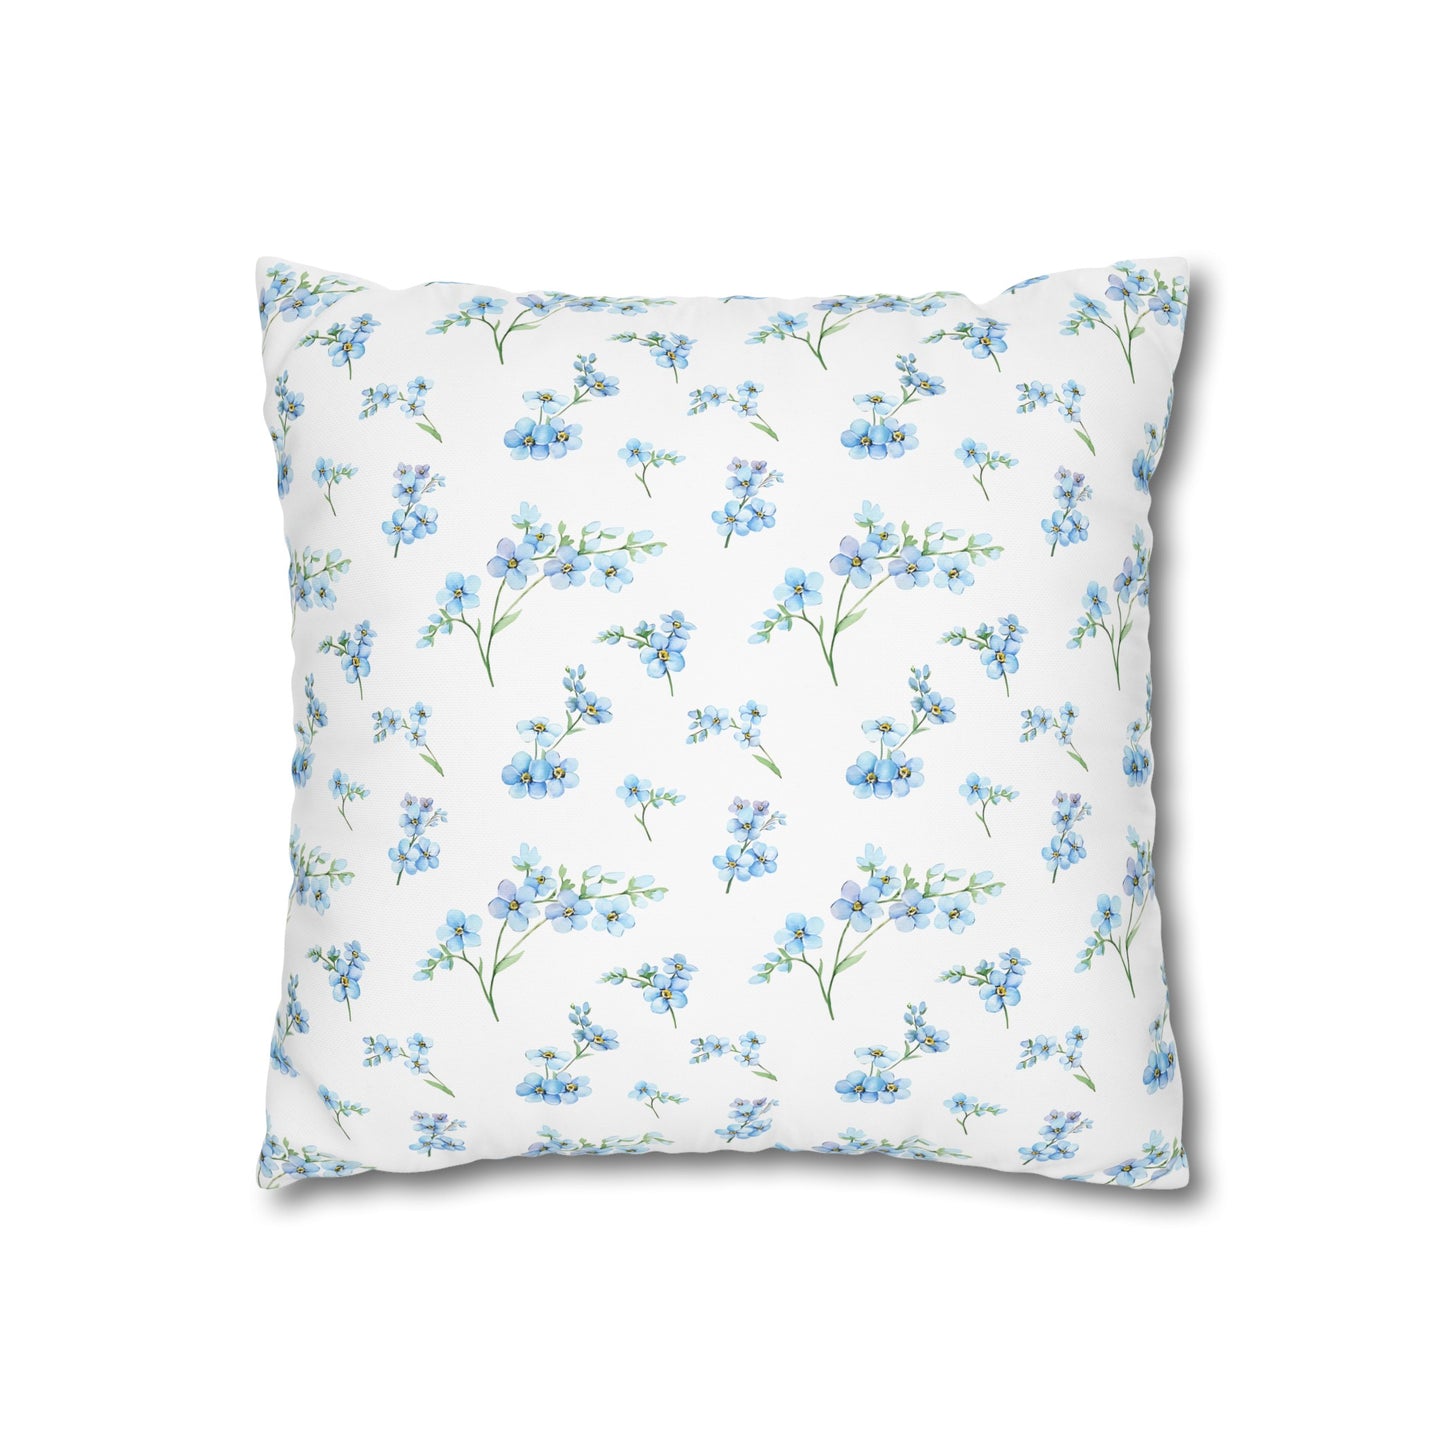 Forget-Me-Not #2 Cushion Cover